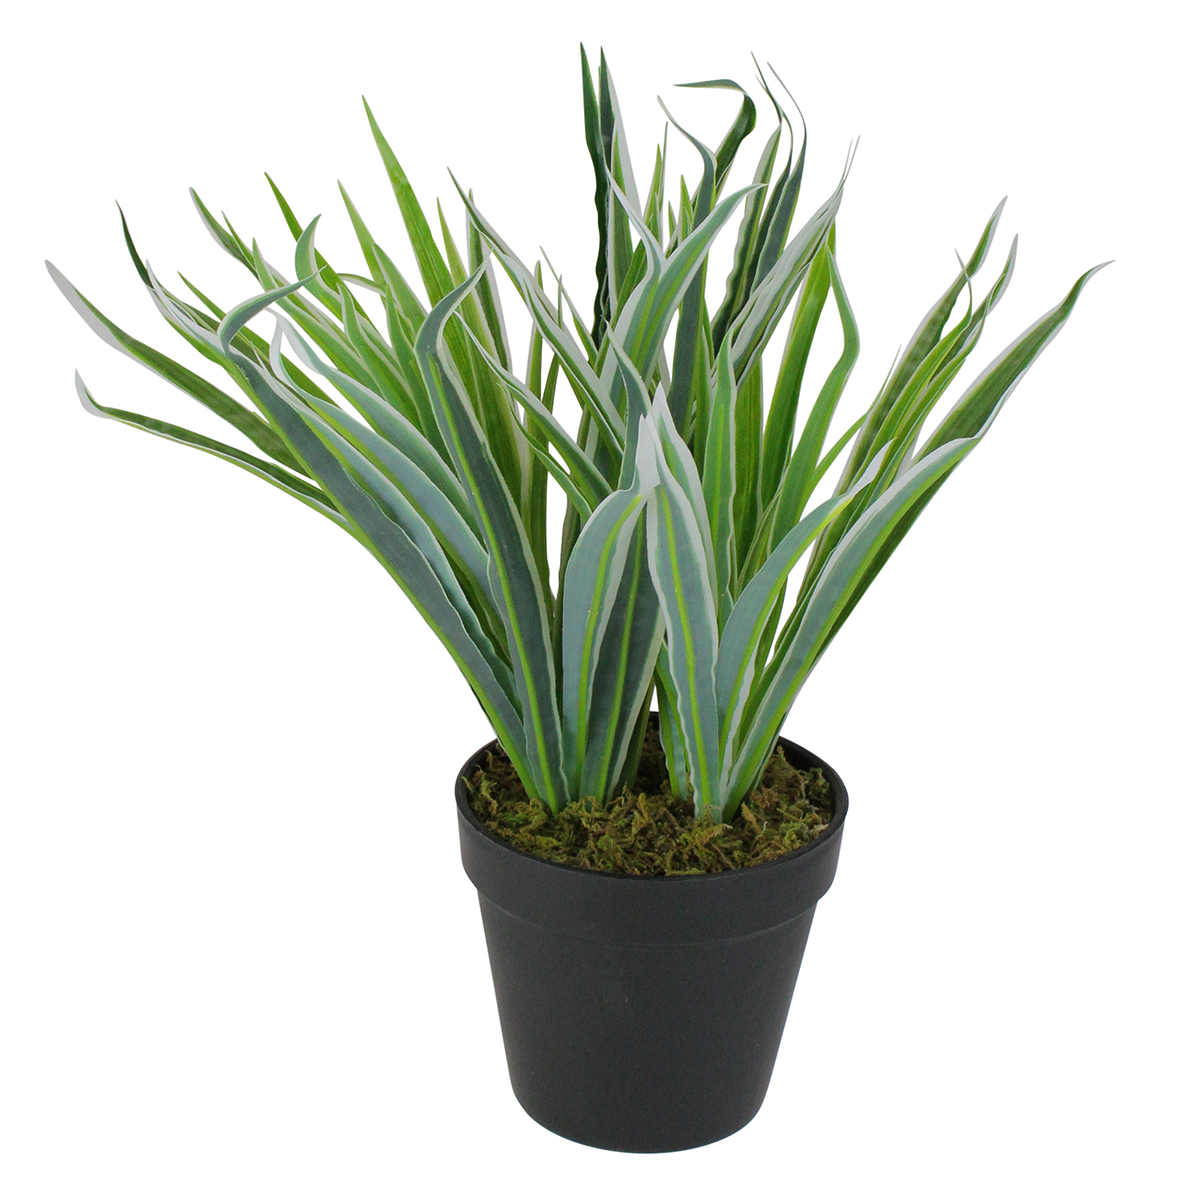 Northlight Seasonal 13 Two-Tone Artificial Grass Potted Plant